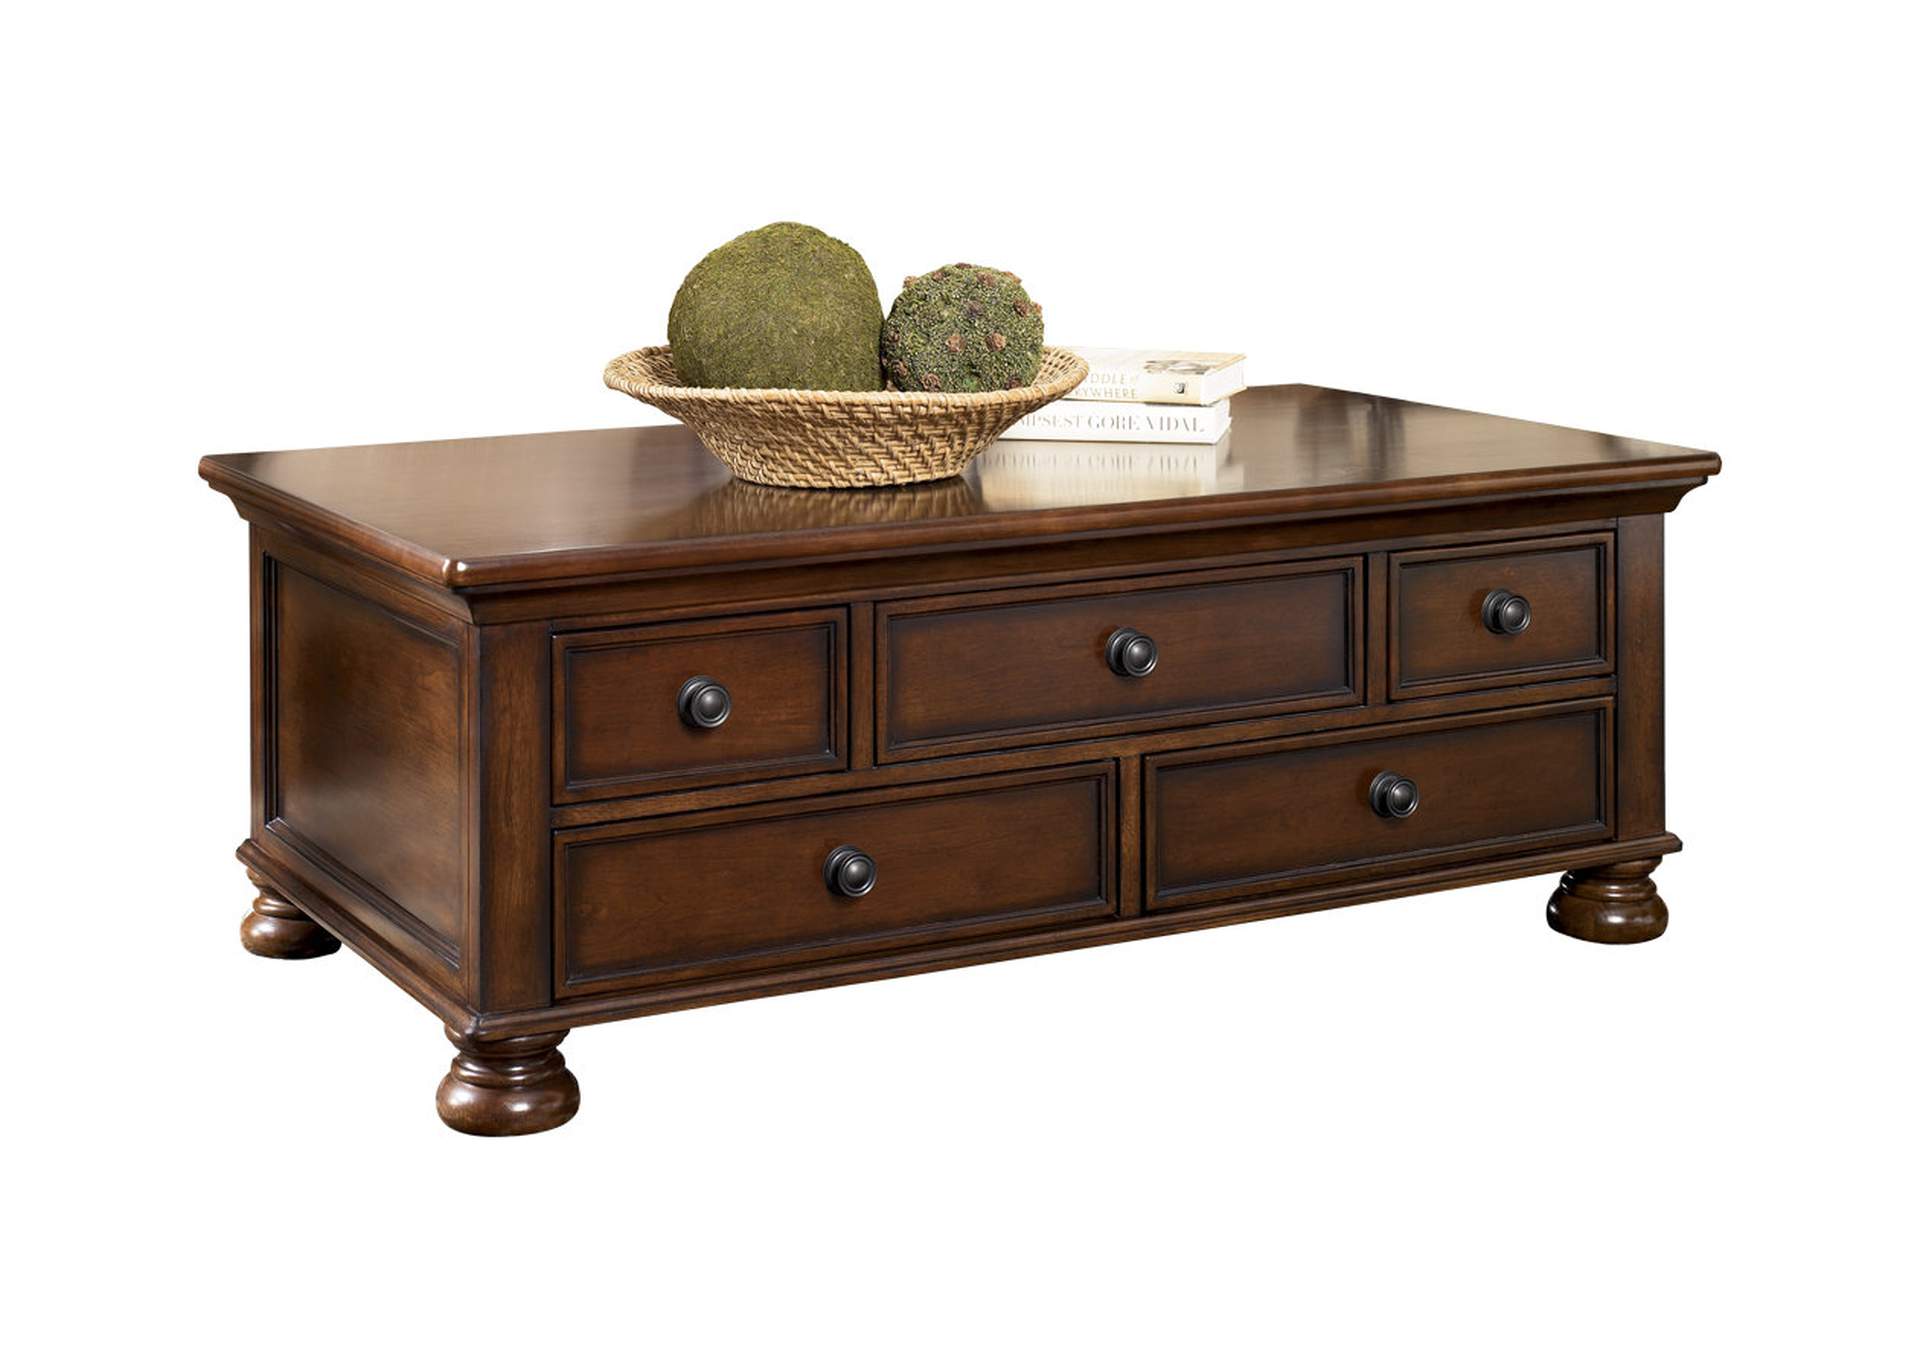 Porter Coffee Table Ashley Furniture Homestore Independently Owned And Operated By Johnnys Furniture Group